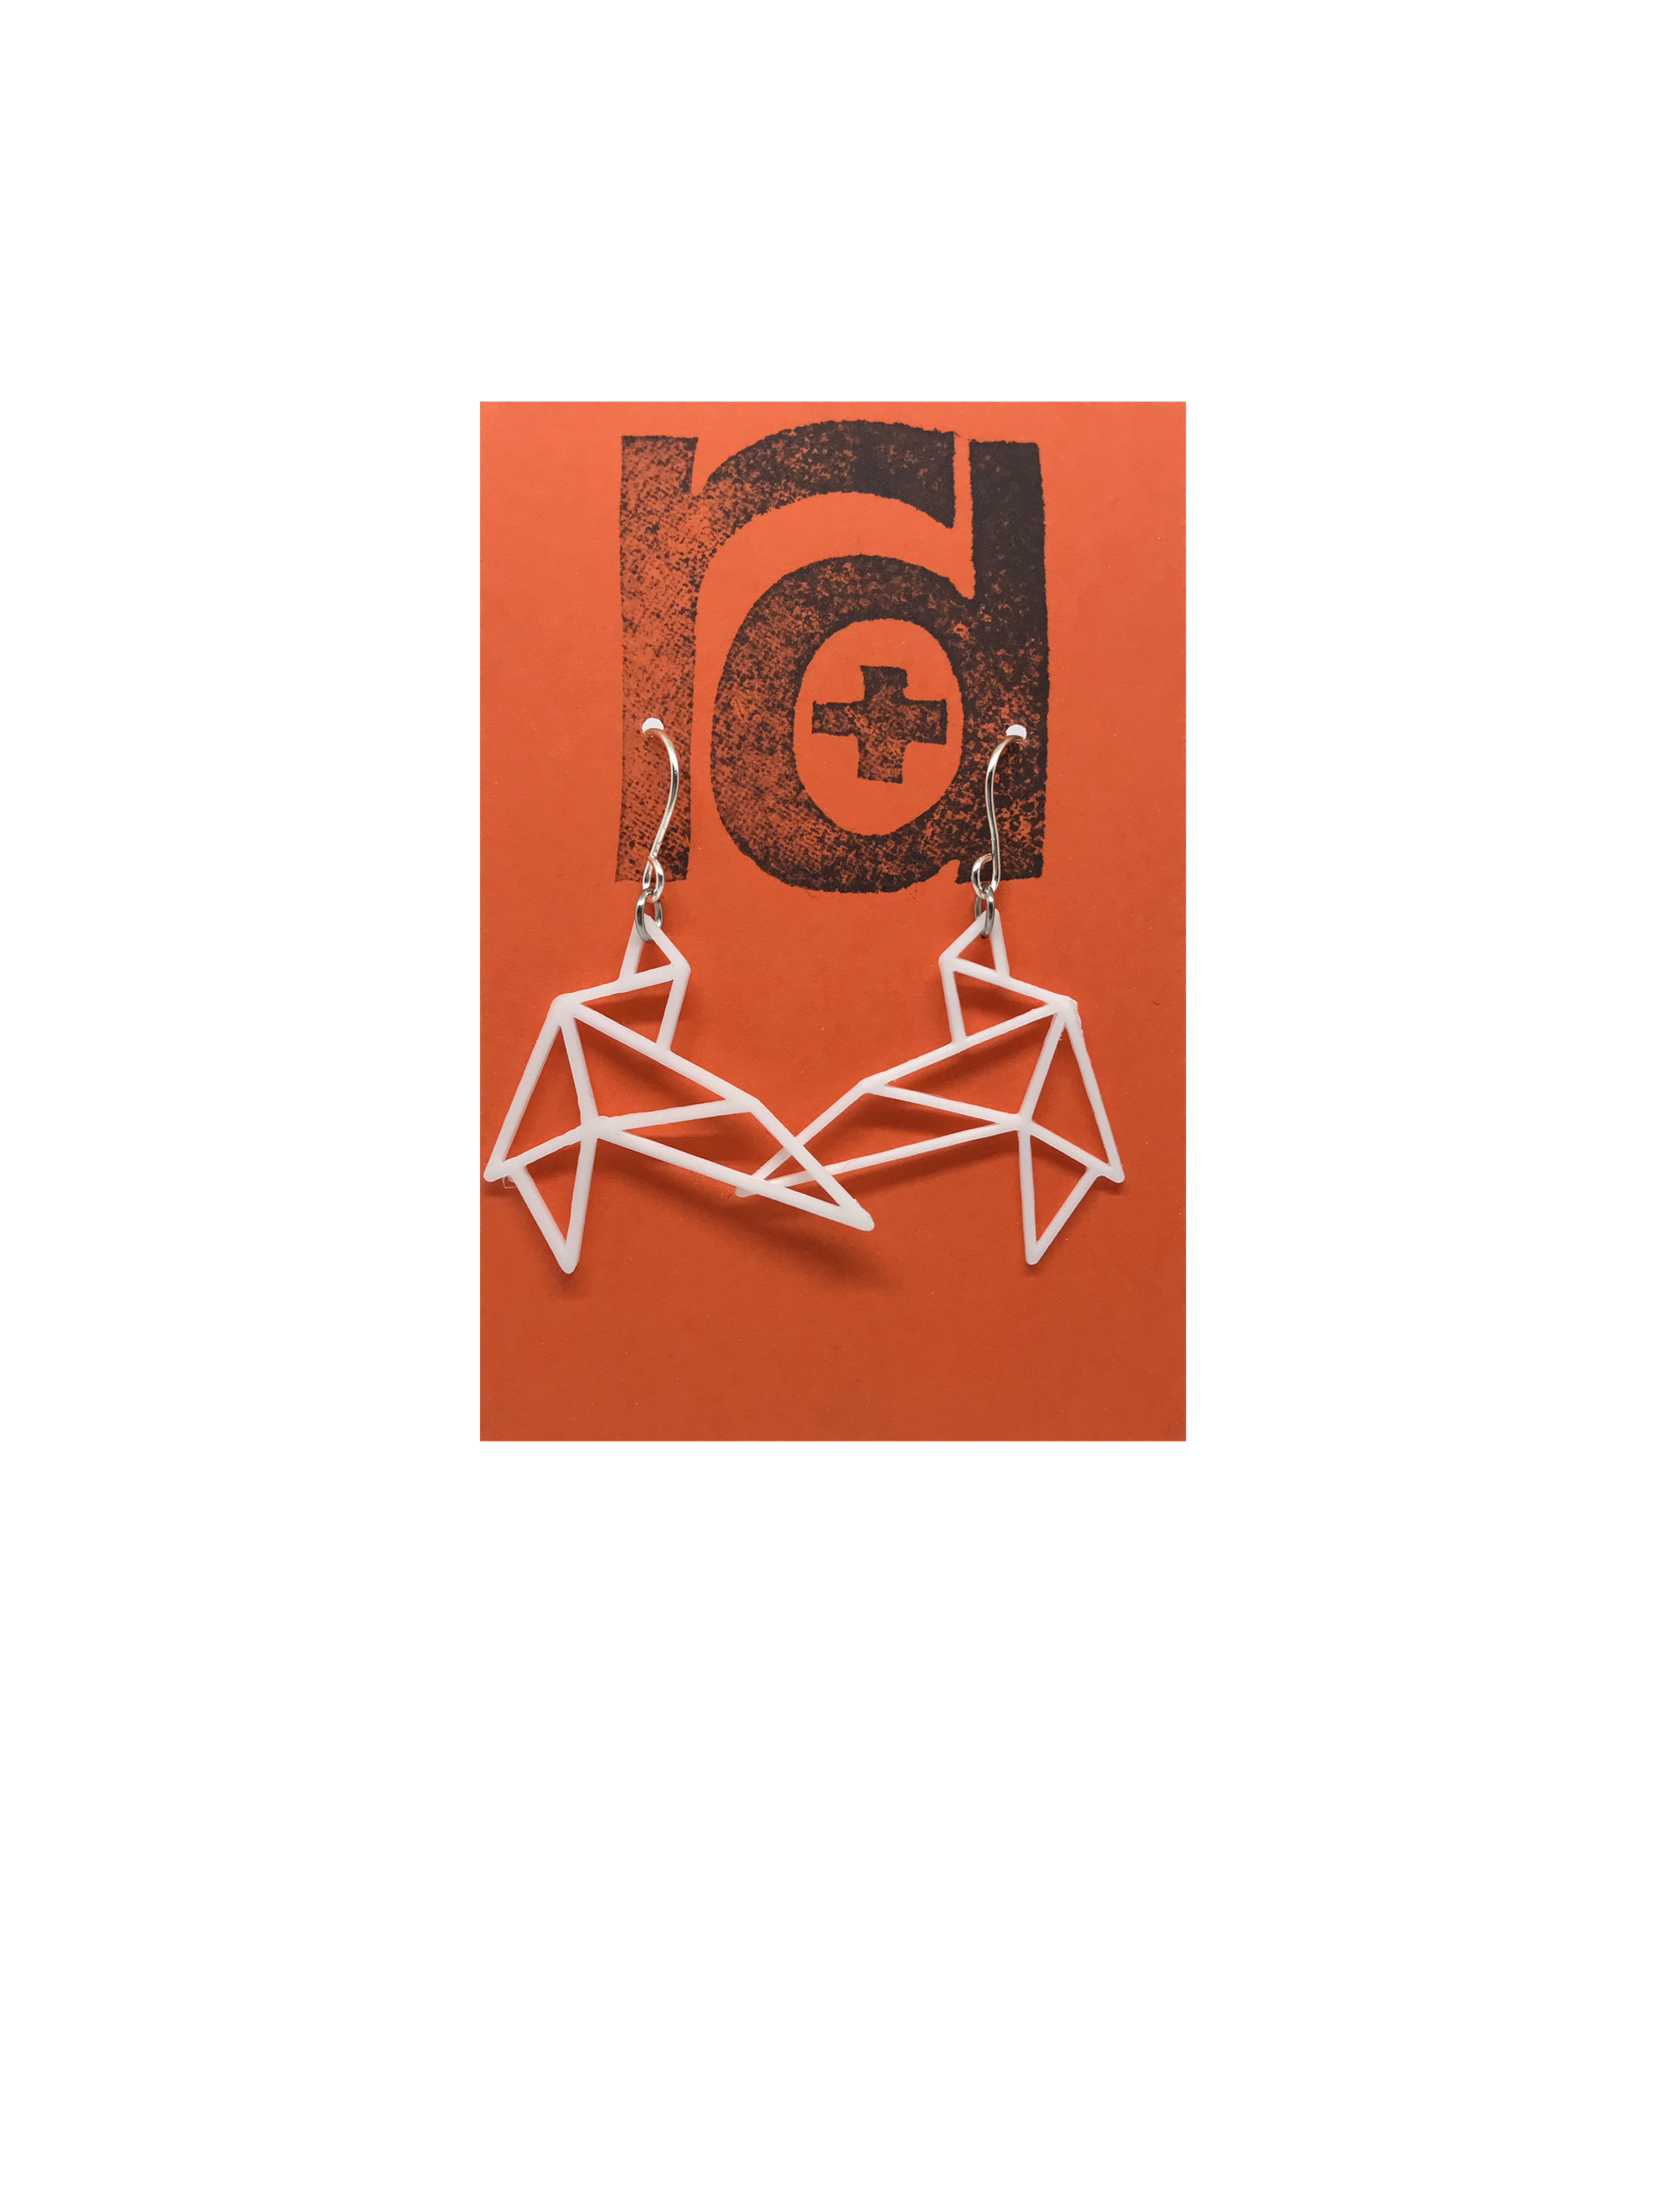 Shown on a bright orange earring card are two R+D earrings. They are geometric line shapes of birds flying. These sustainable 3D printed earrings are printed in white.